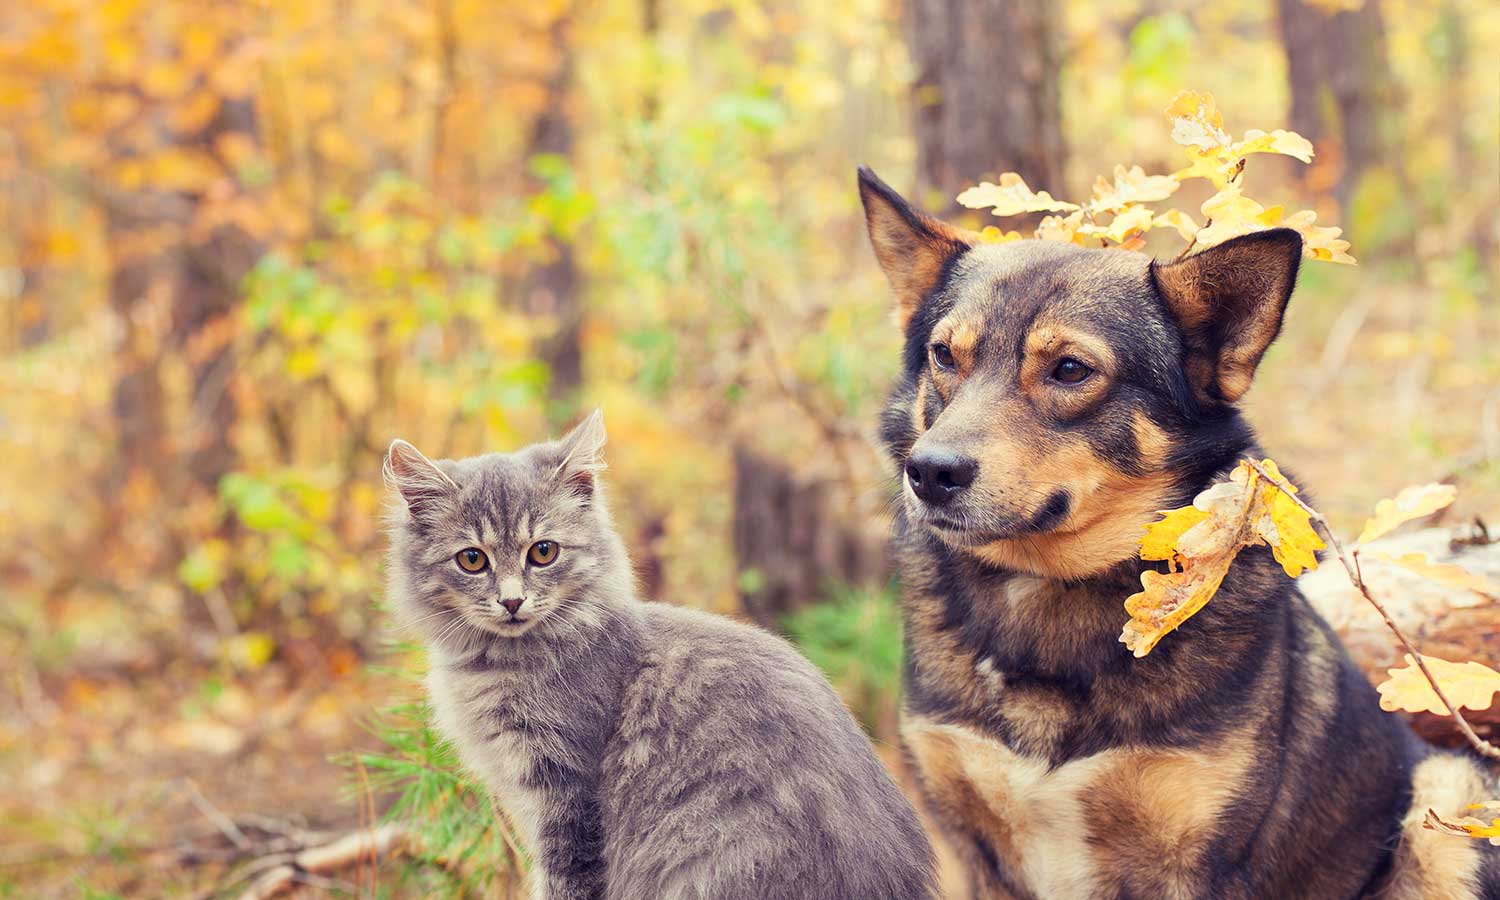 A dog and cat out in the leaves